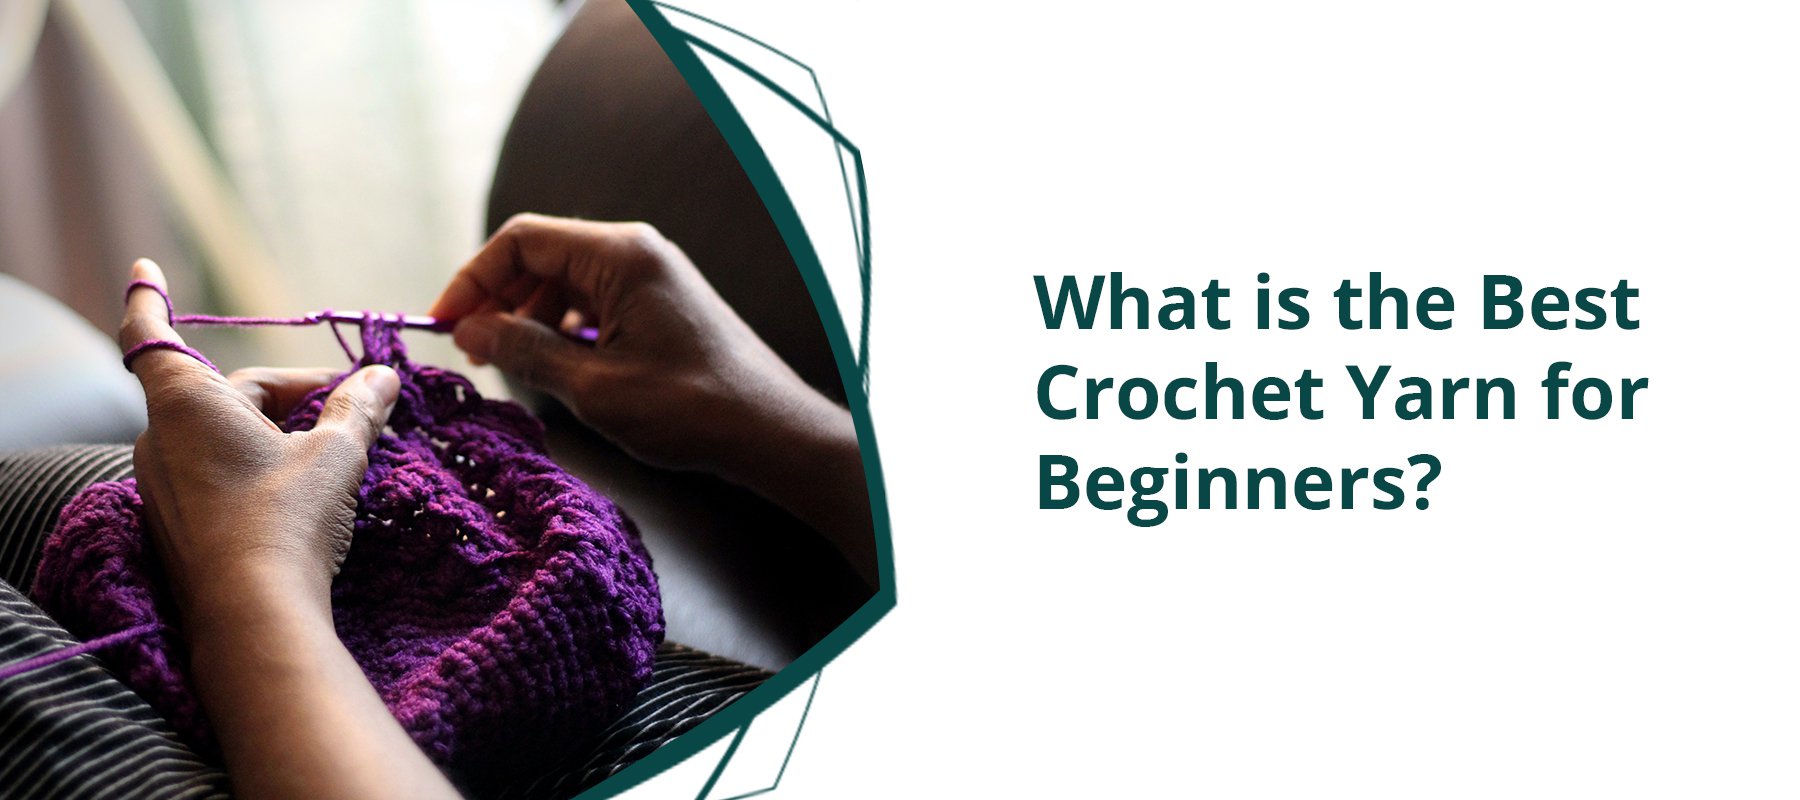 Learning Crochet: What is the Best Yarn for Beginners?